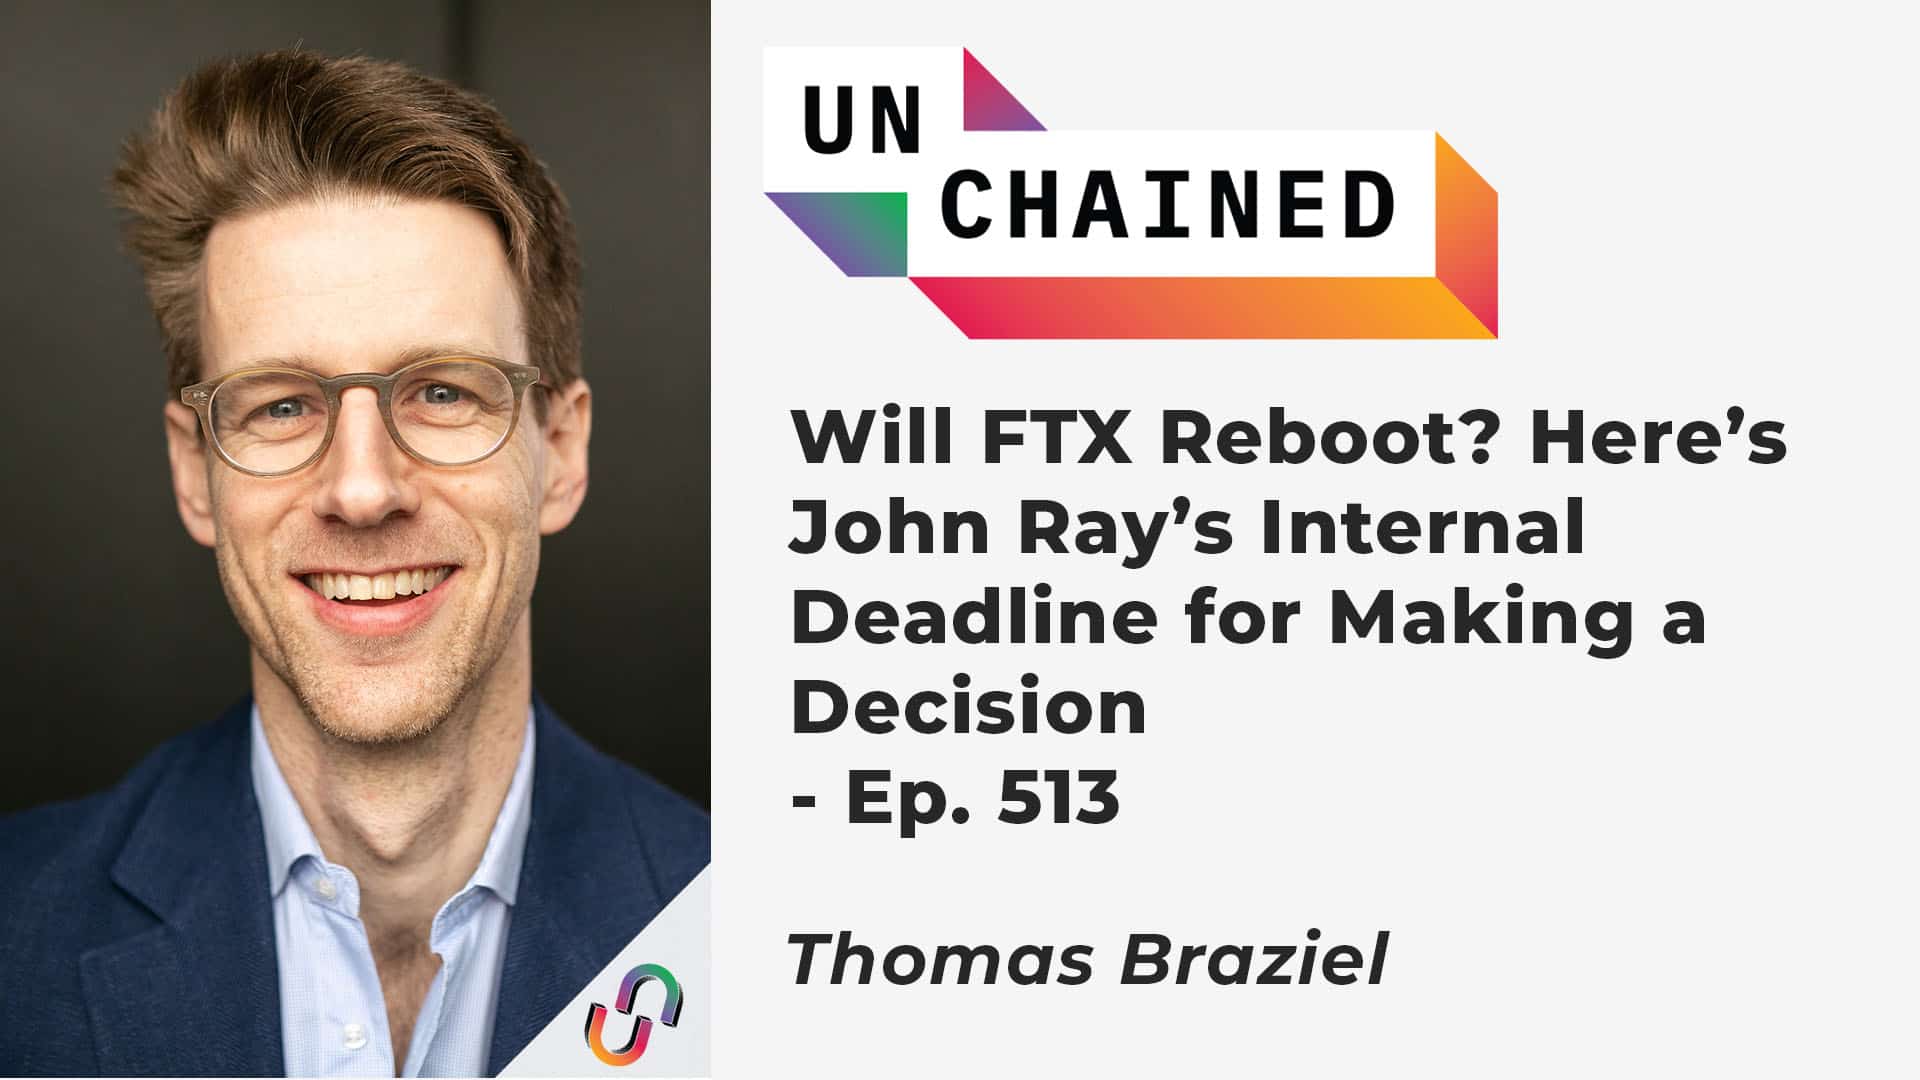 Will FTX Reboot? Here’s John Ray’s Internal Deadline for Making a Decision - Ep. 513